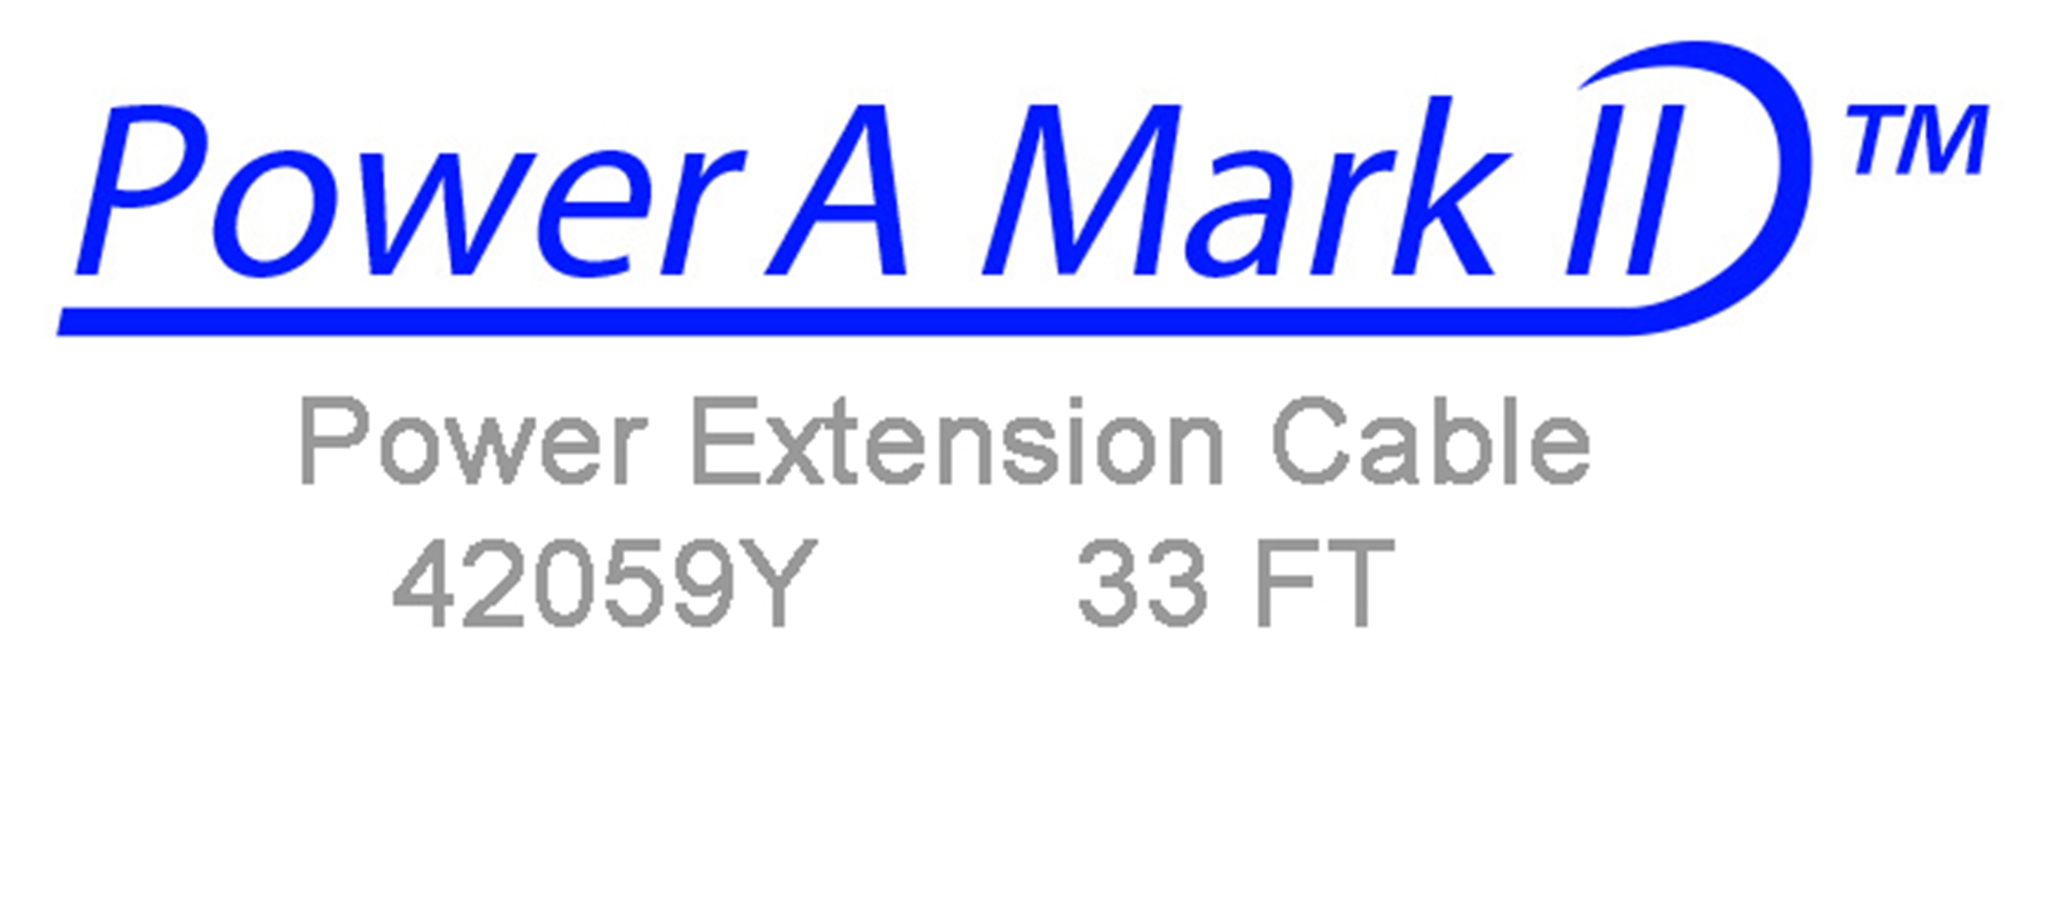 42059Y Power Extension Cable 33 Ft Length